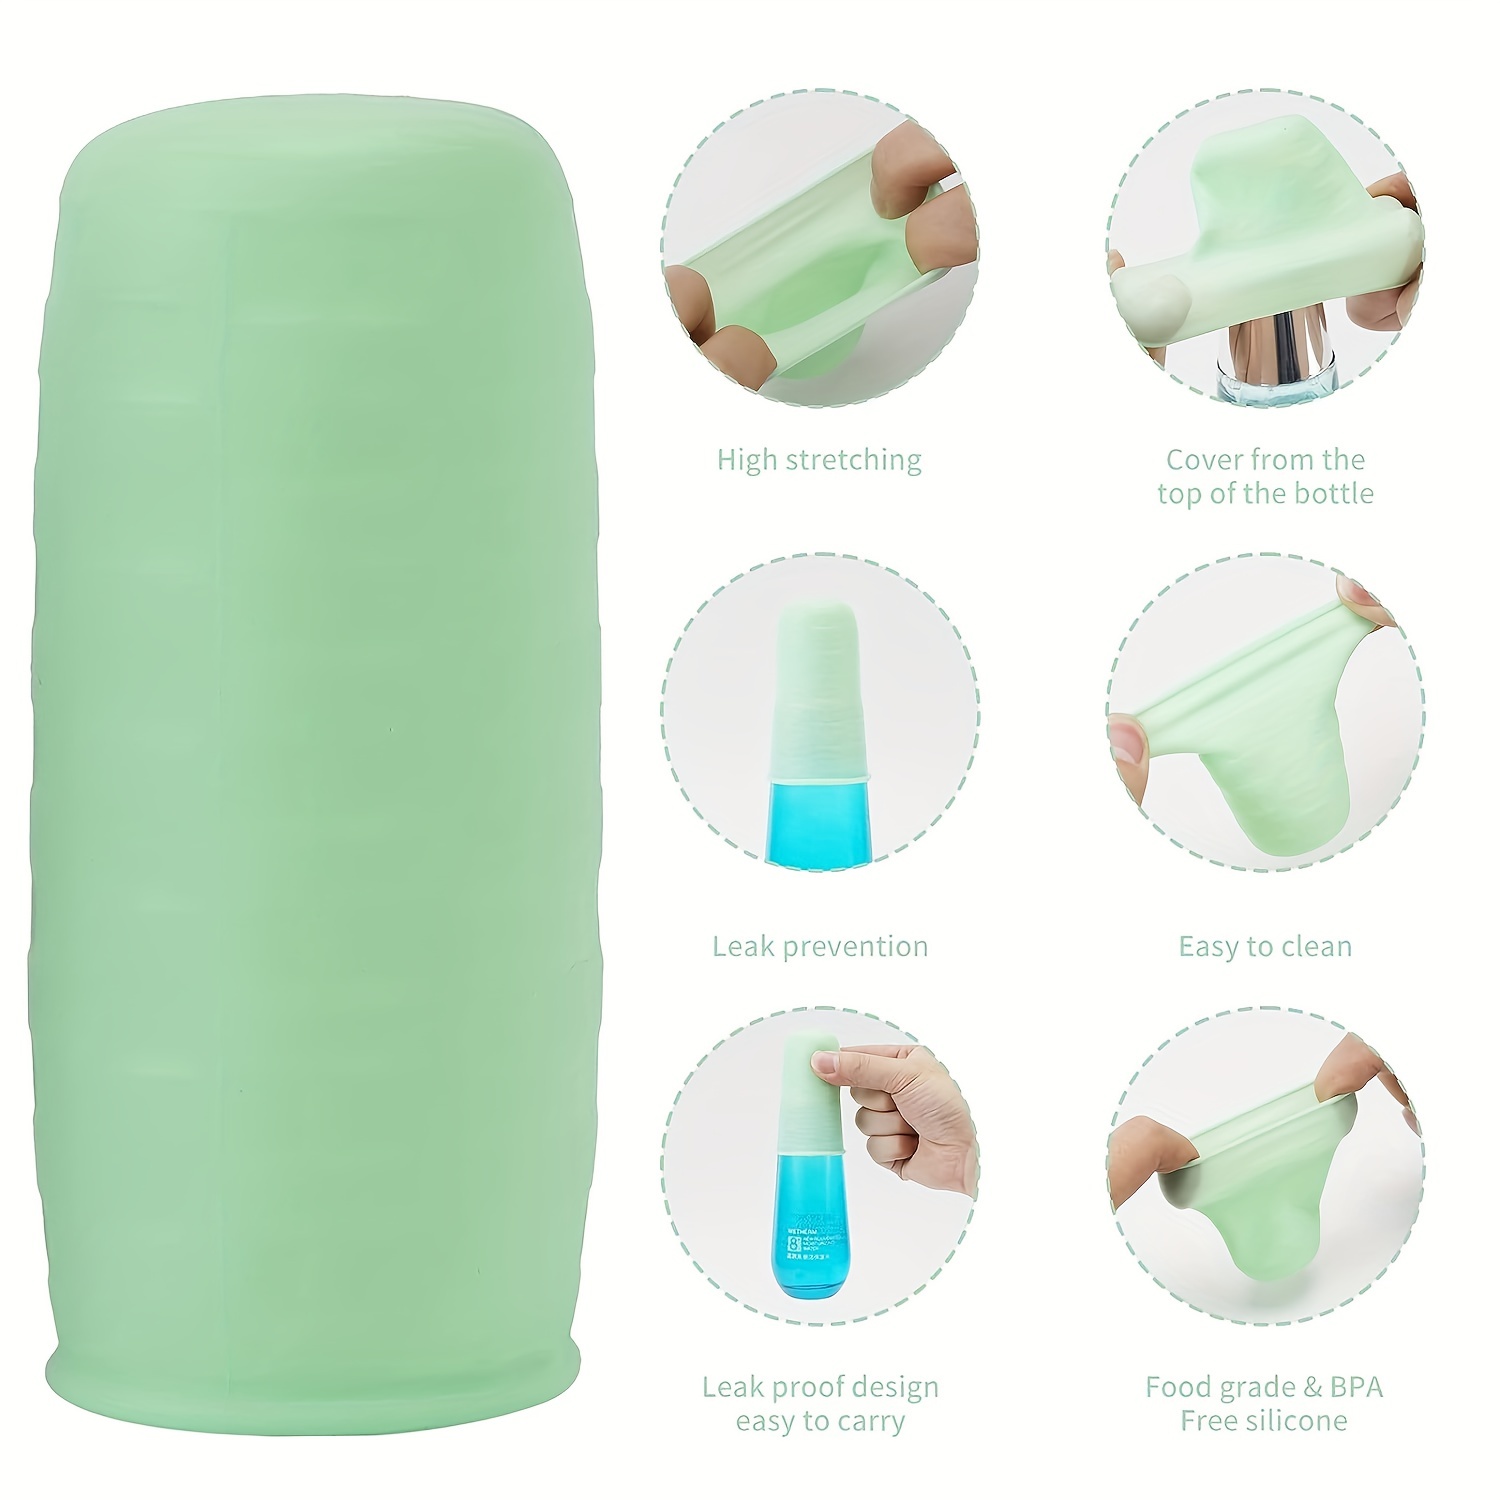 8Pcs Elastic Sleeves Toiletry covers for Leak Proofing, Silicone